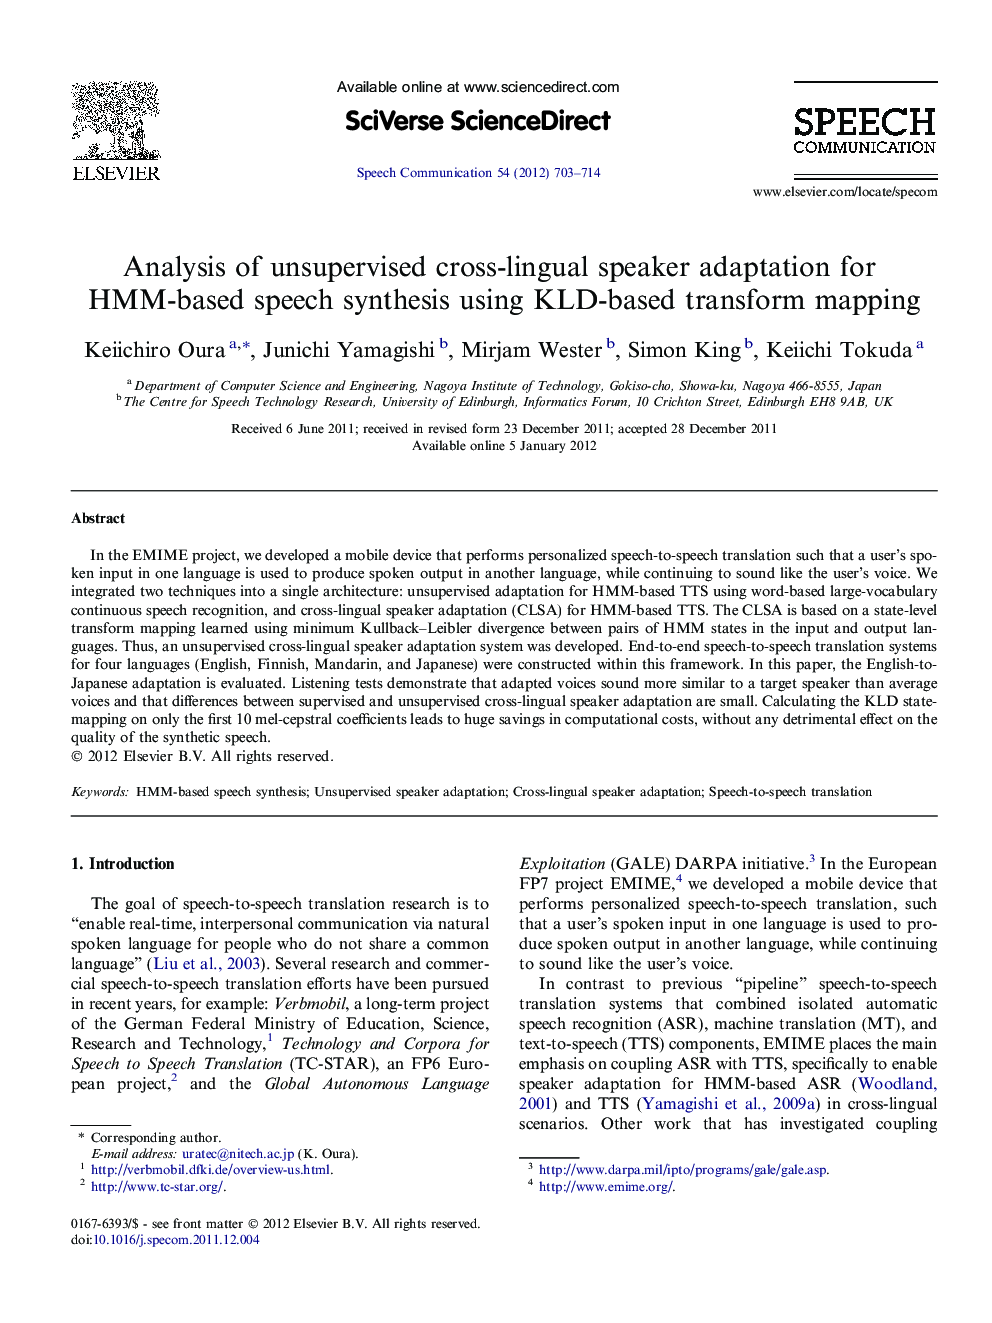 Analysis of unsupervised cross-lingual speaker adaptation for HMM-based speech synthesis using KLD-based transform mapping